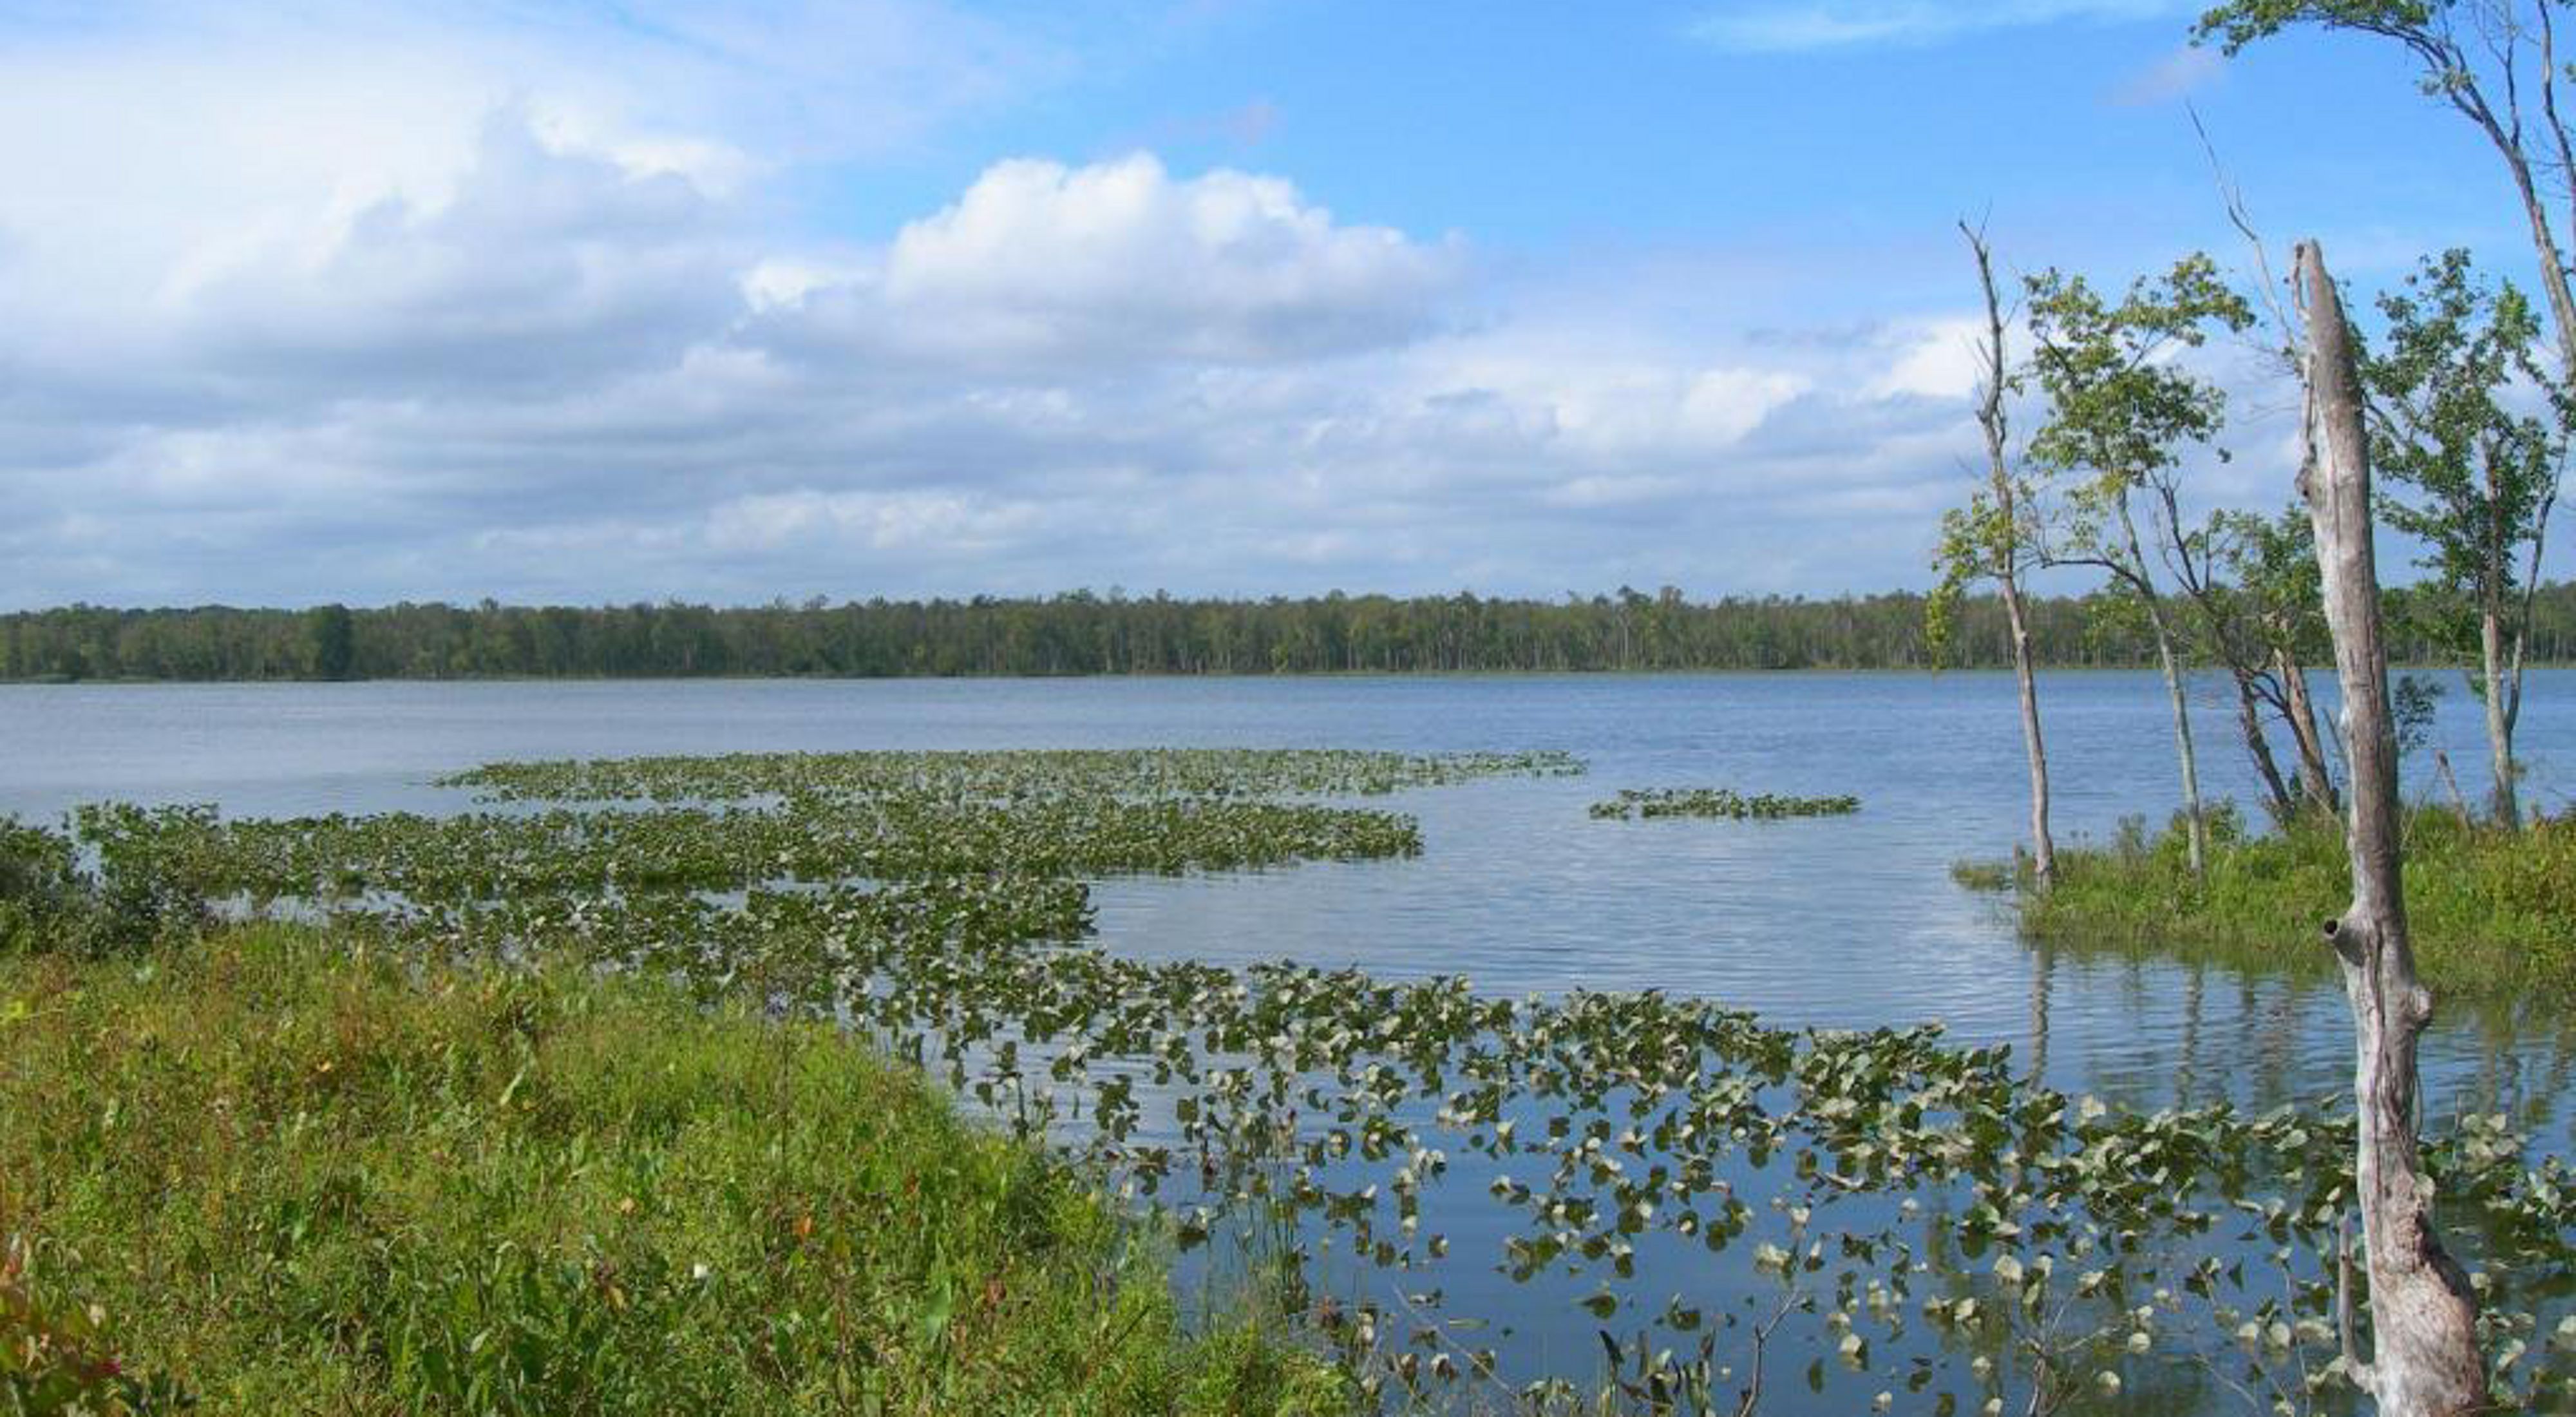 Looking out across a body of water from the edge of a wetland, with patches of green in the water and dead trees along the edge.